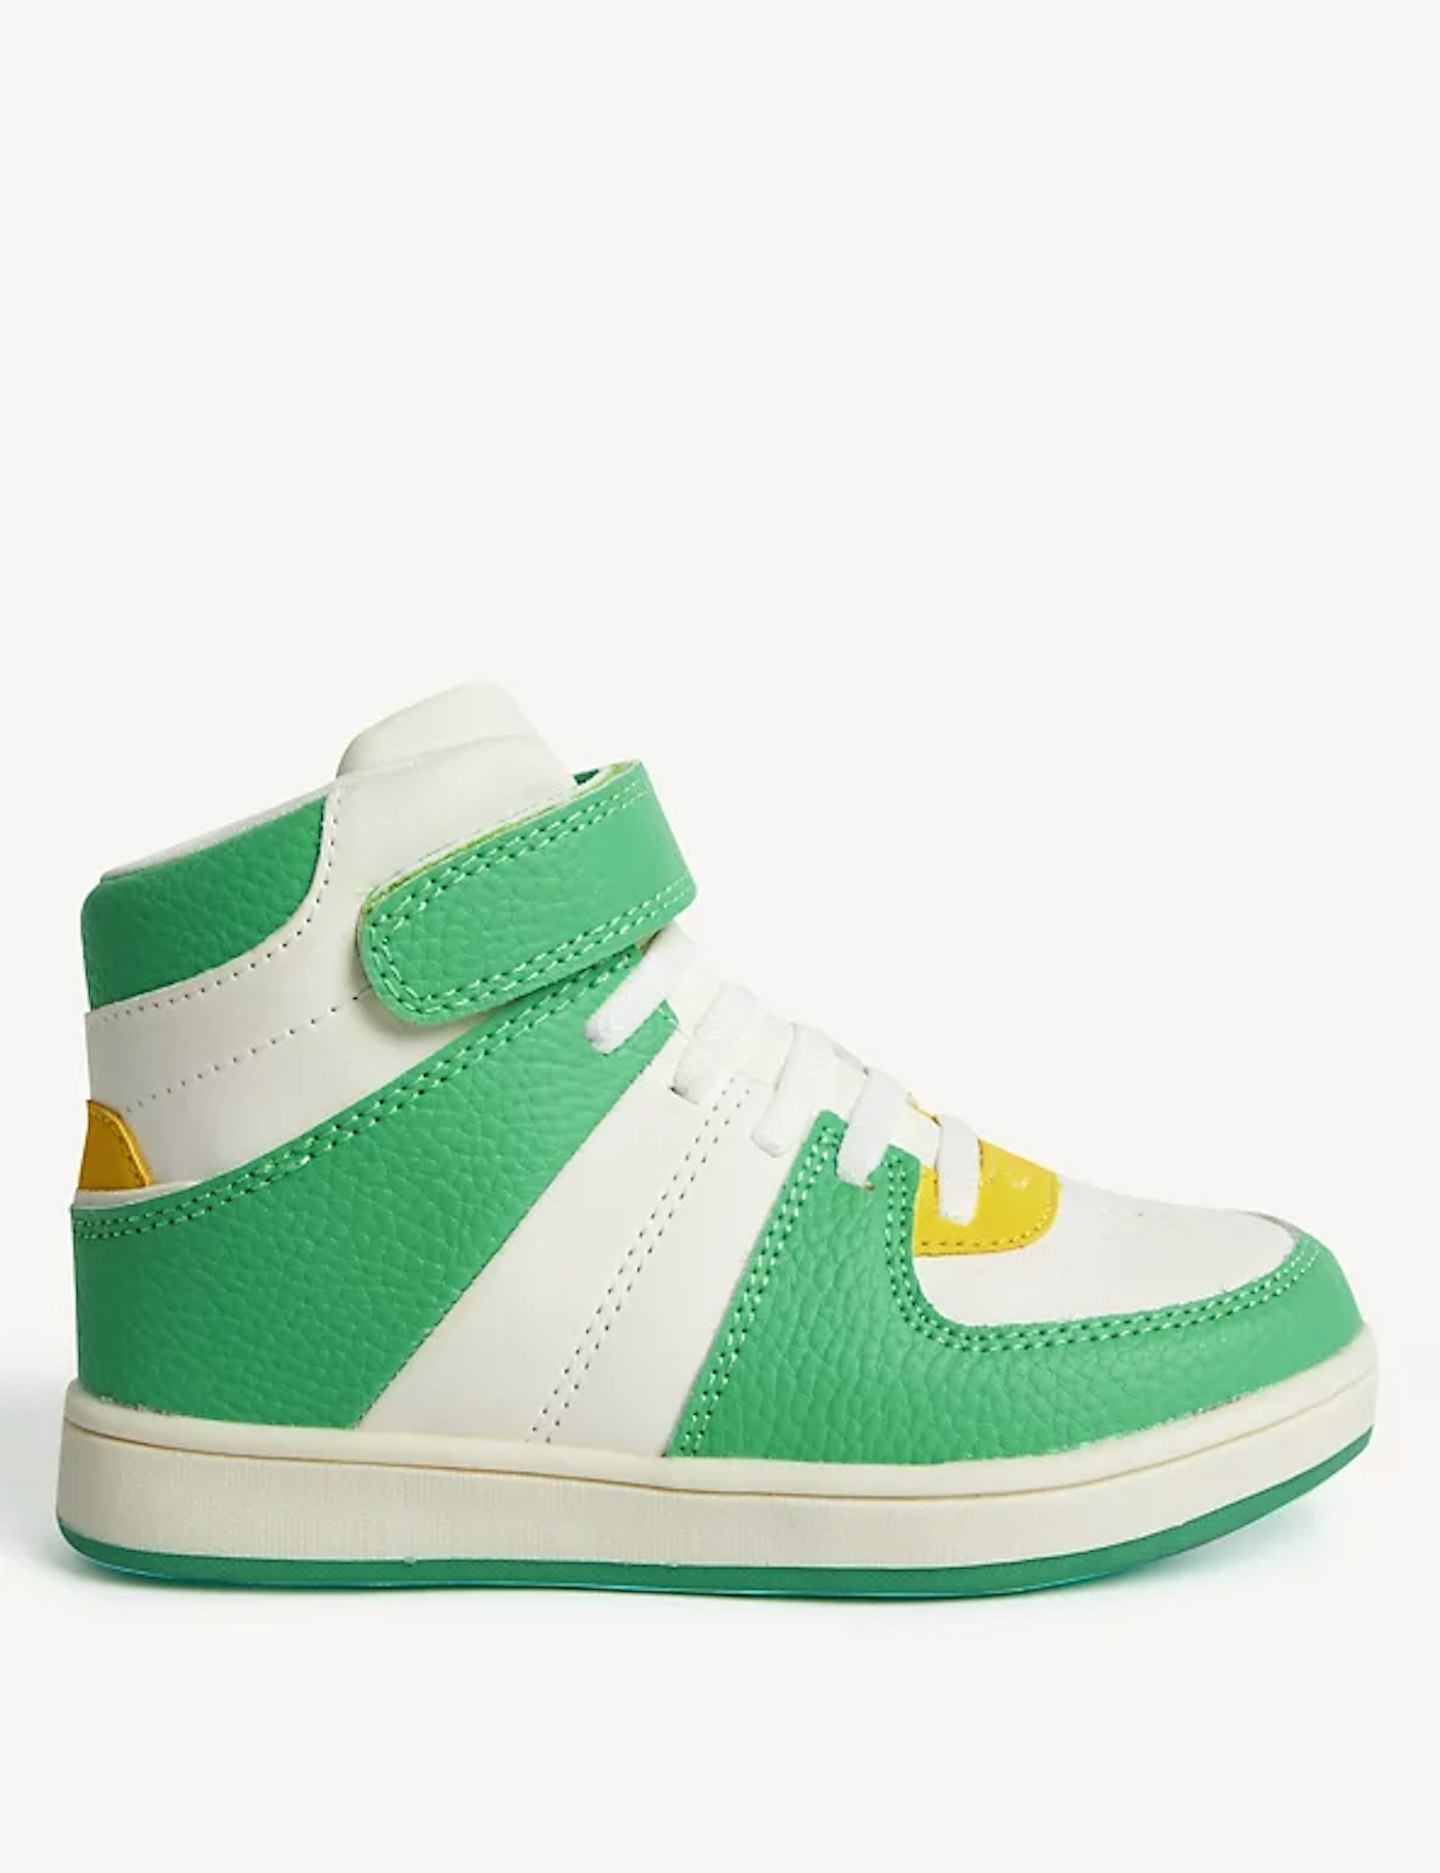 M&S, Kids' High-Top Trainers